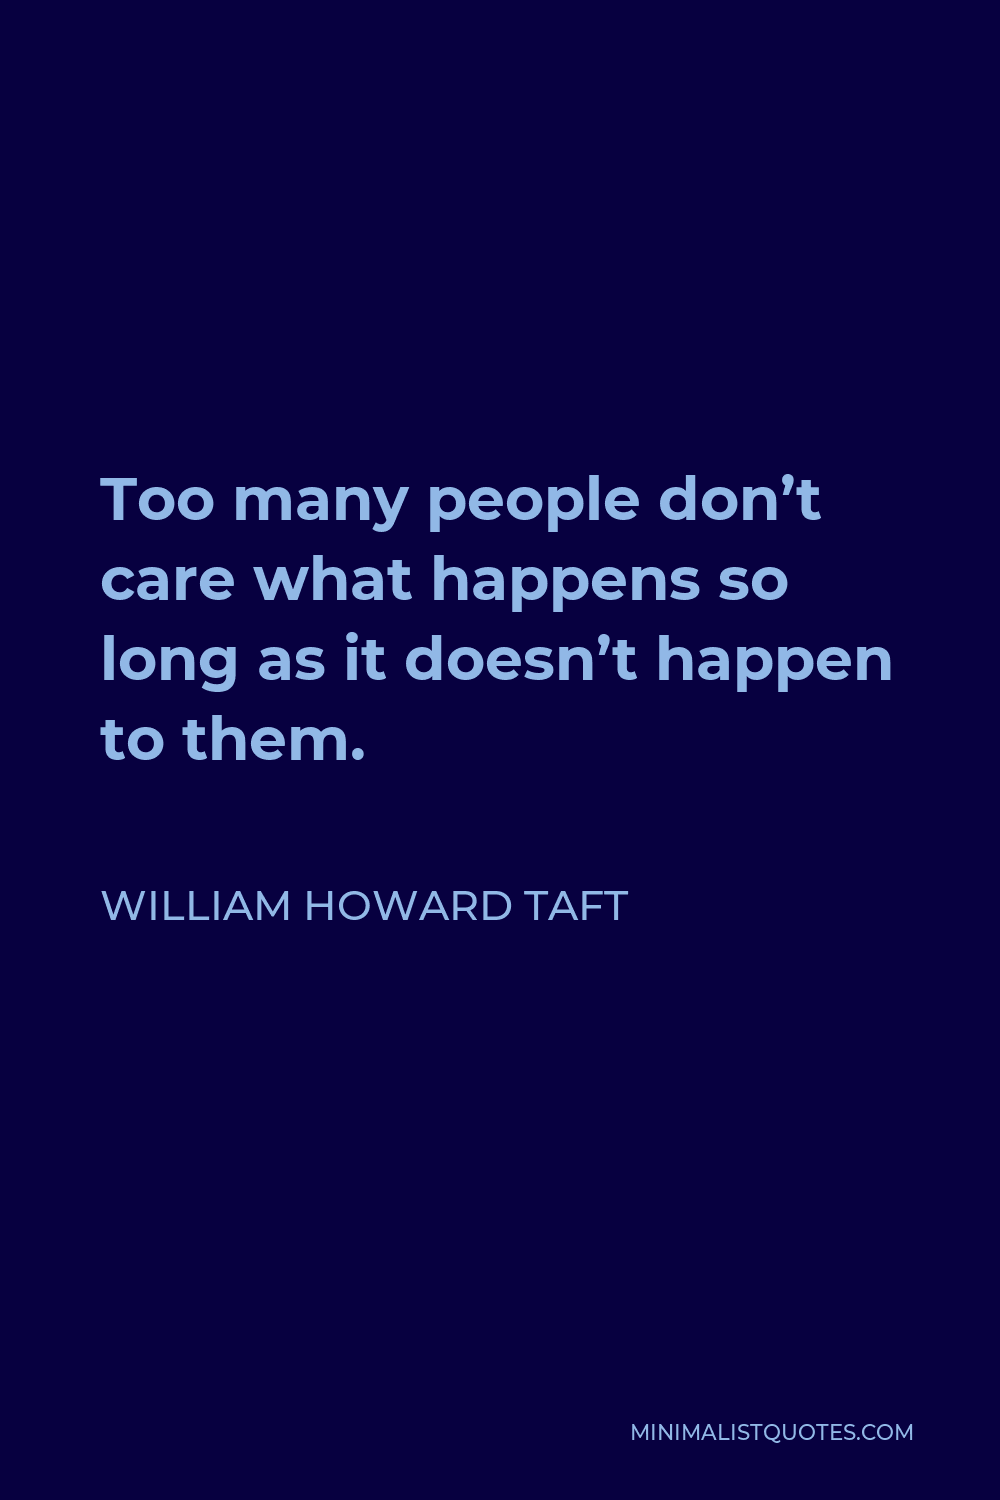 William Howard Taft Quote - Too many people don’t care what happens so long as it doesn’t happen to them.